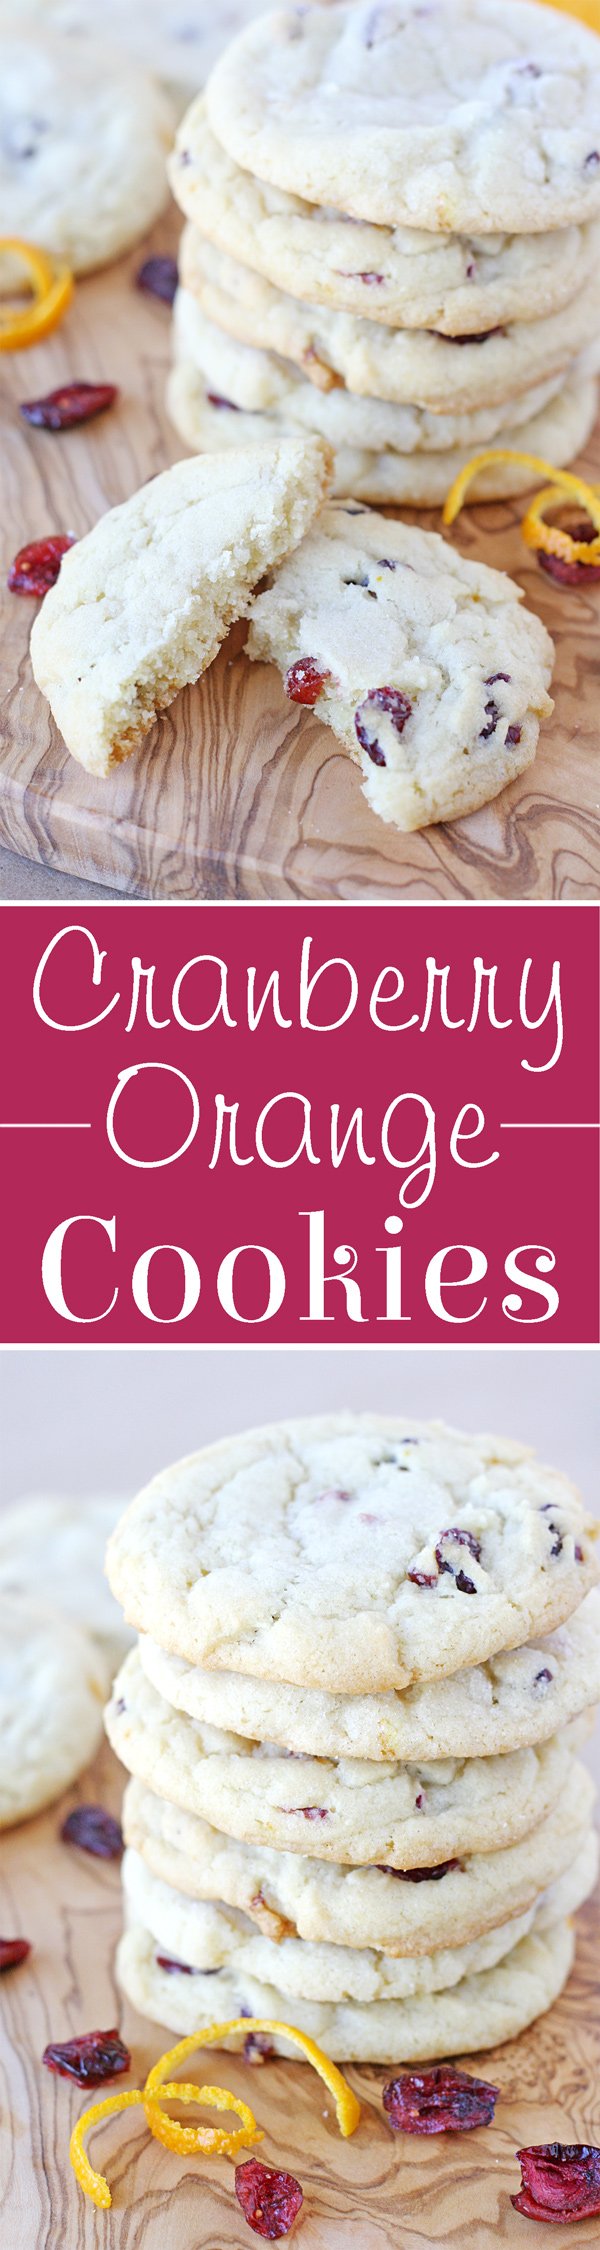 Cranberry Orange Cookies Recipe - Perfect for holiday gifts and cookie exchanges! 